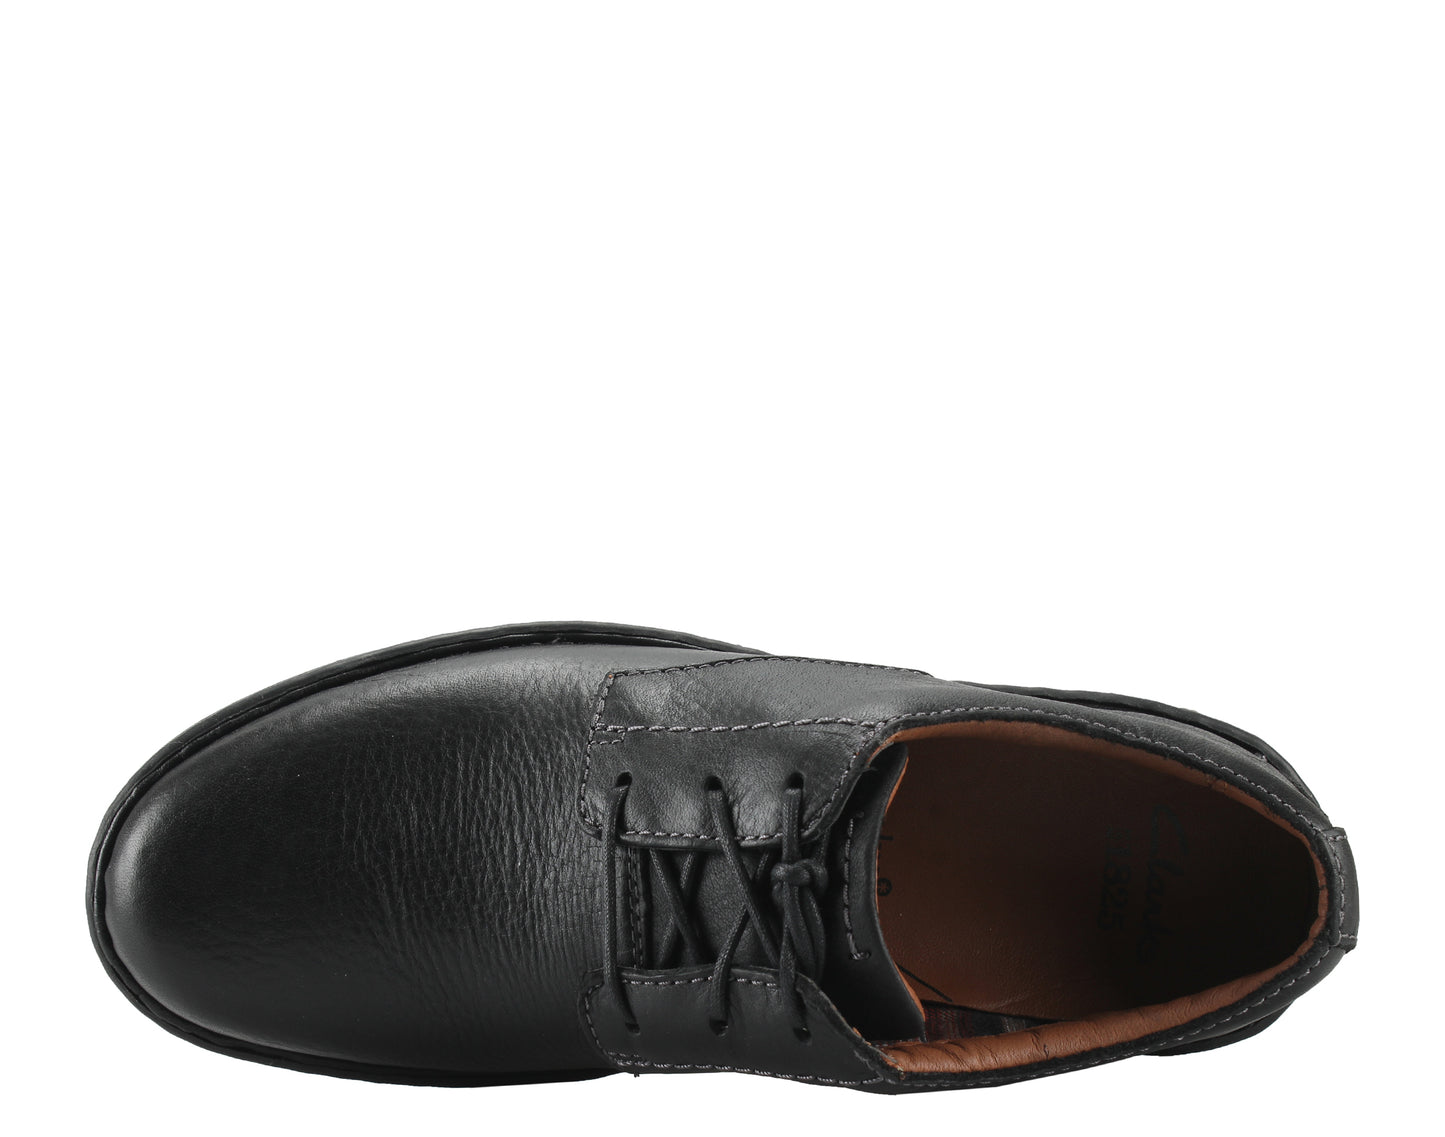 Clarks Stratton Way Men's Casual Shoes